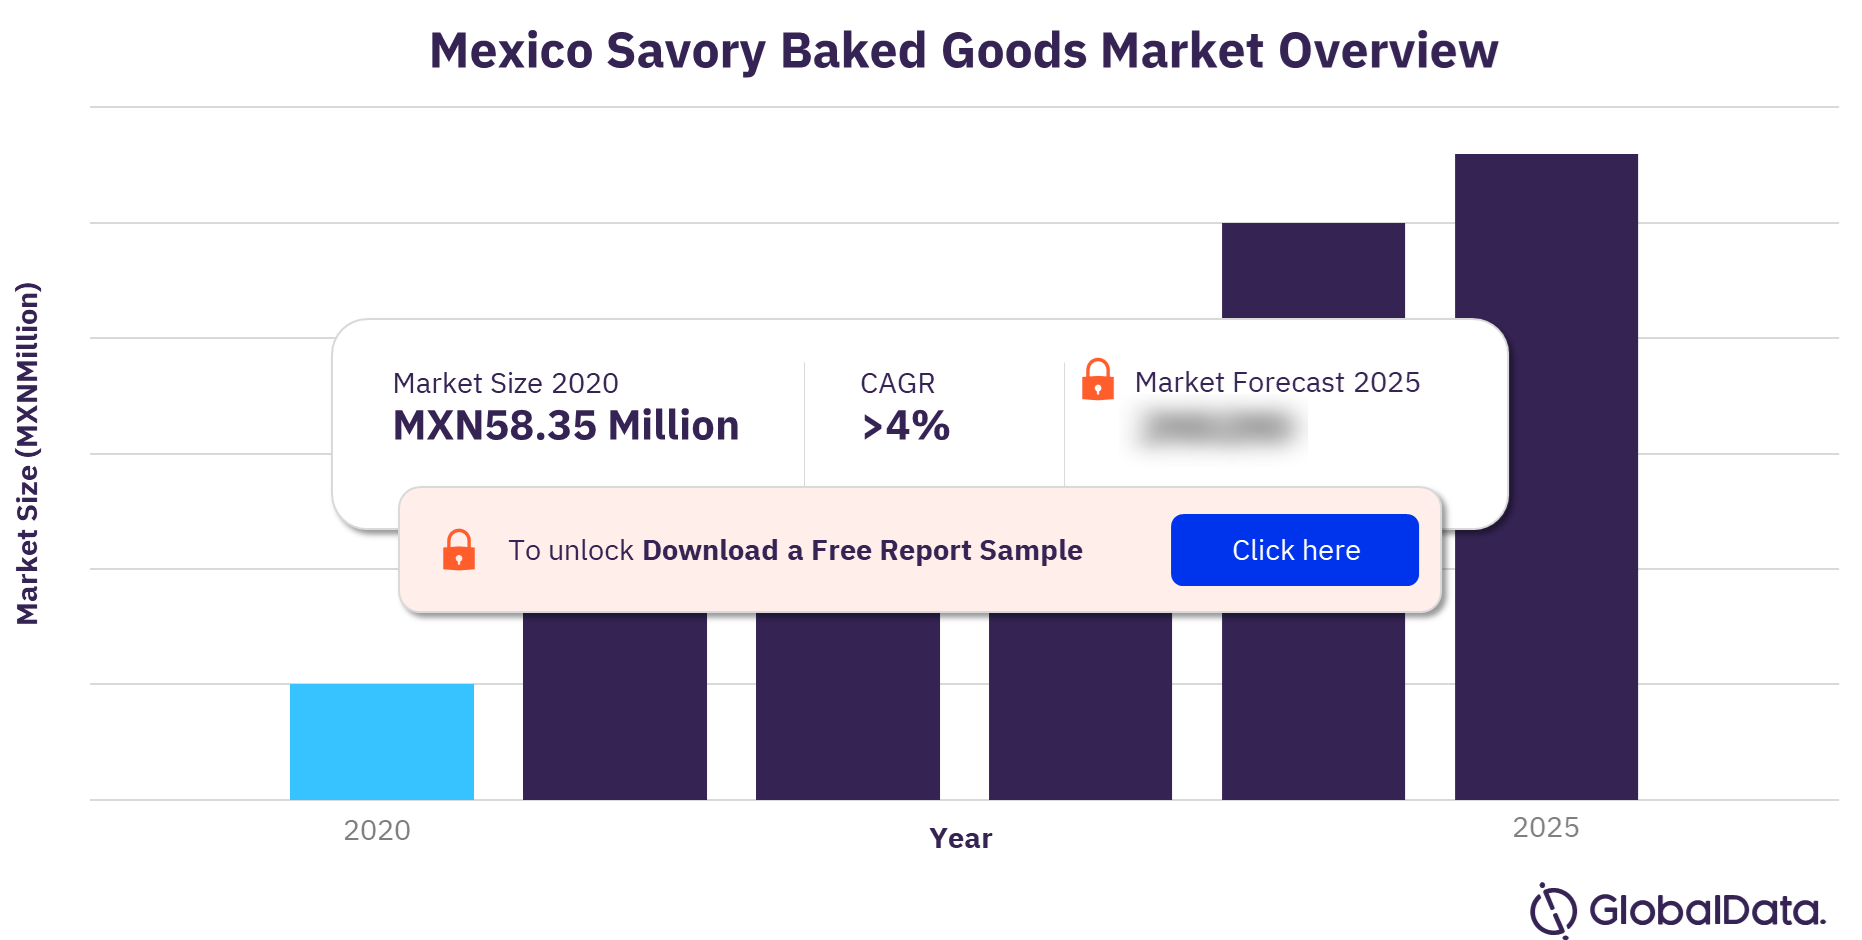 Mexico savory baked goods market outlook